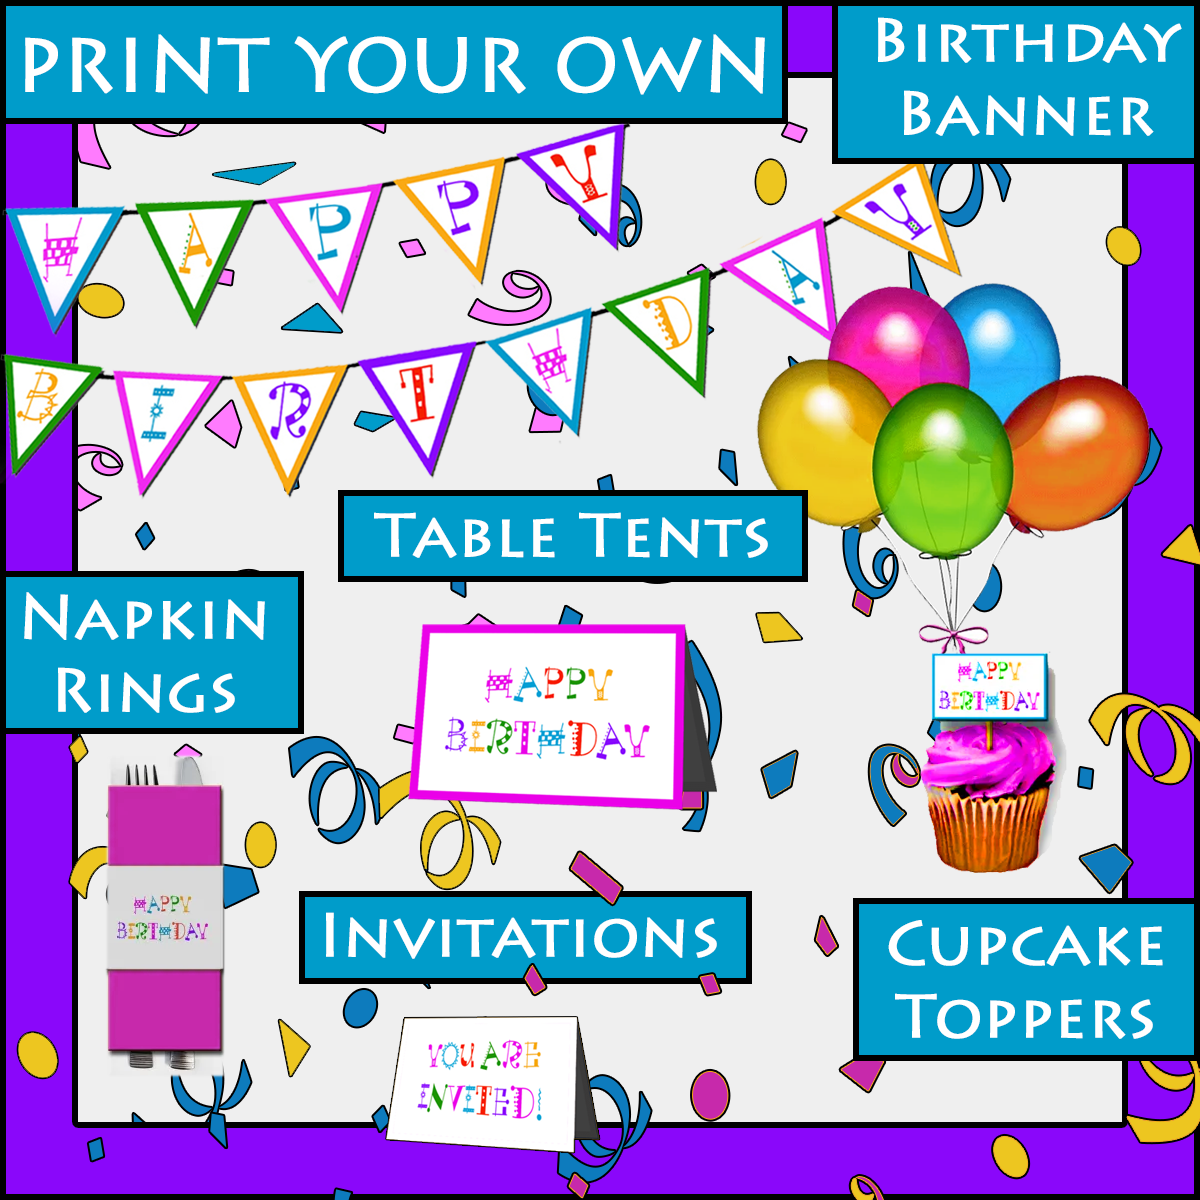 11th of august birthdays clipart